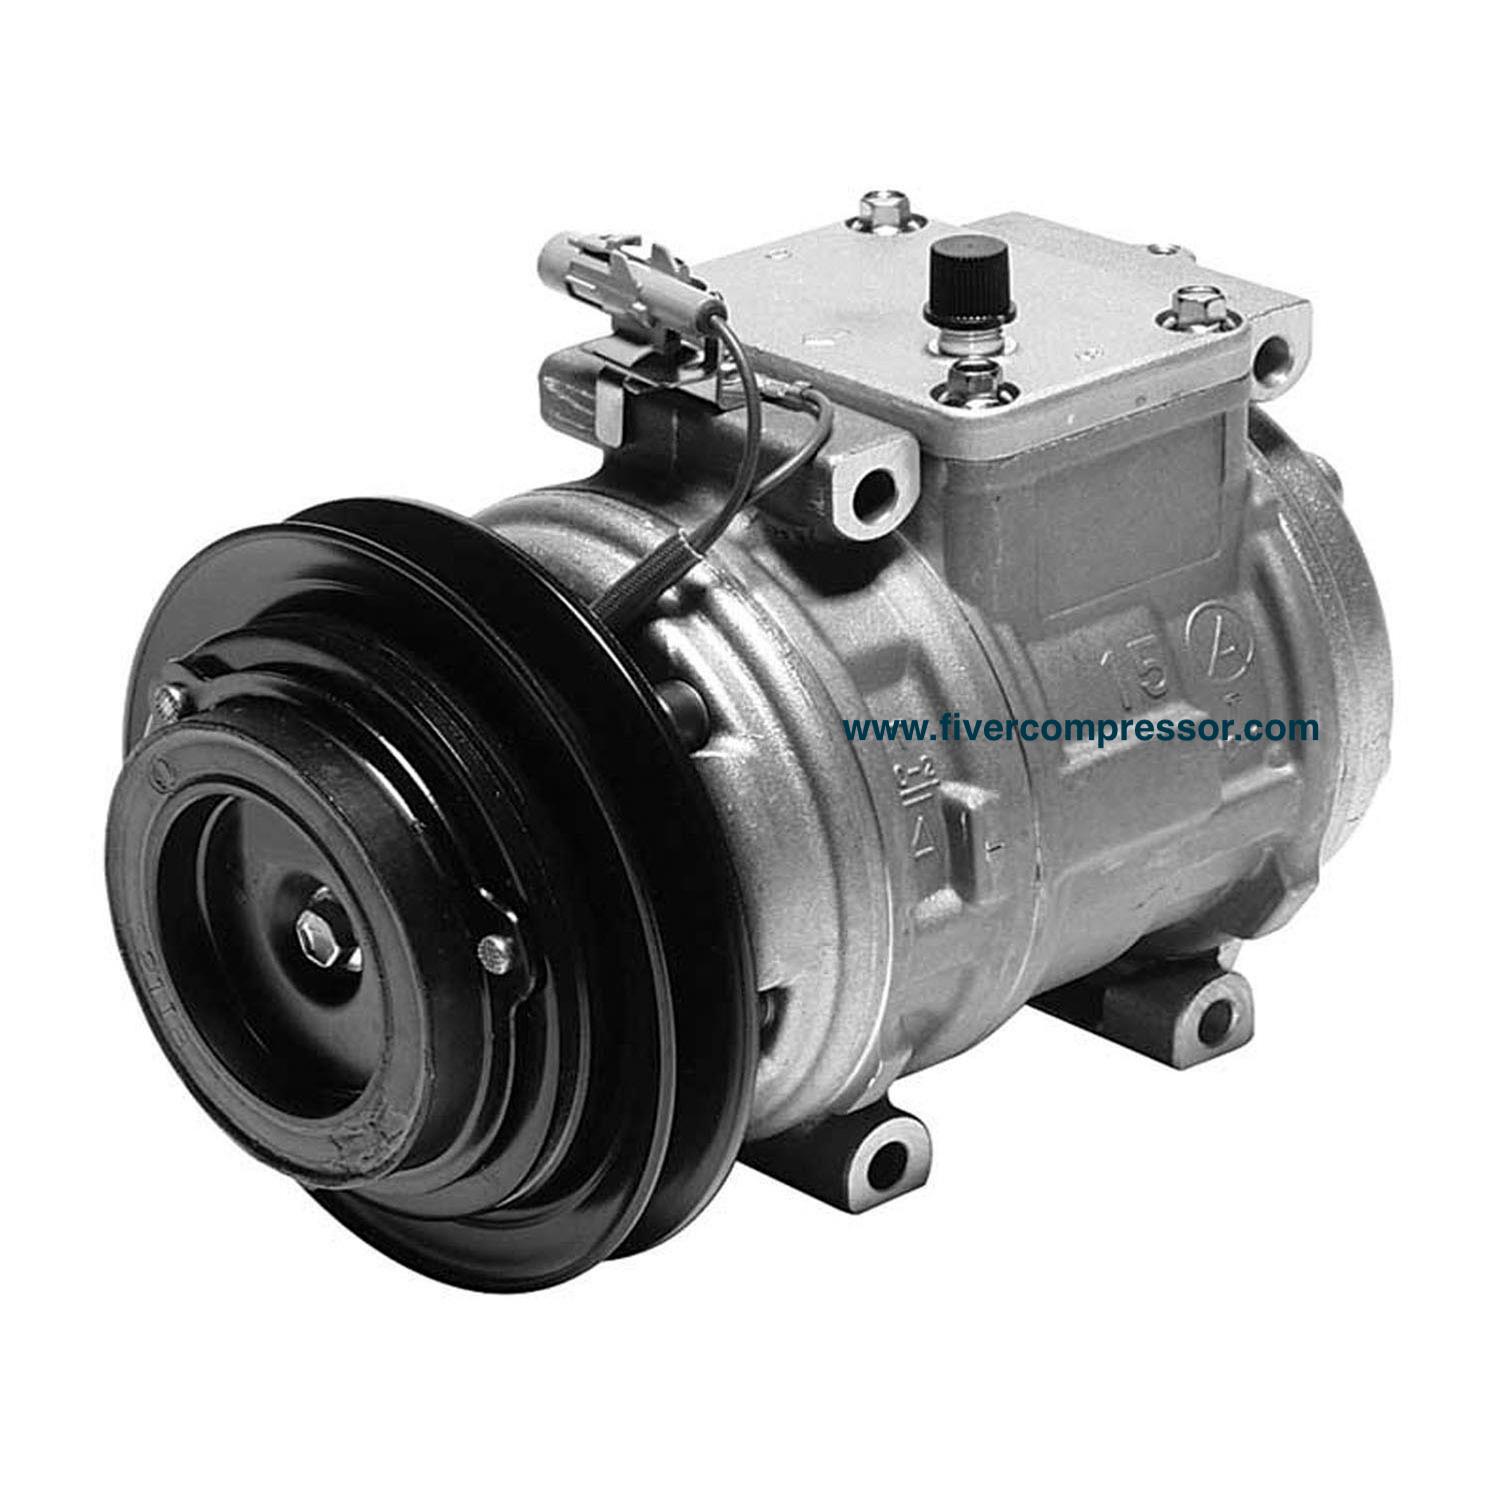 10PA15C Compressor Assy, Cooler A1 Groove, 88320-35270, 8832035280,88310-35340, 4711141 for Toyota Hilux/4Runner Truck RN101/RN106/RN110/RN80/RN85/RN90 1989-1995 for Kia Sportage 2.0L 1996-2001